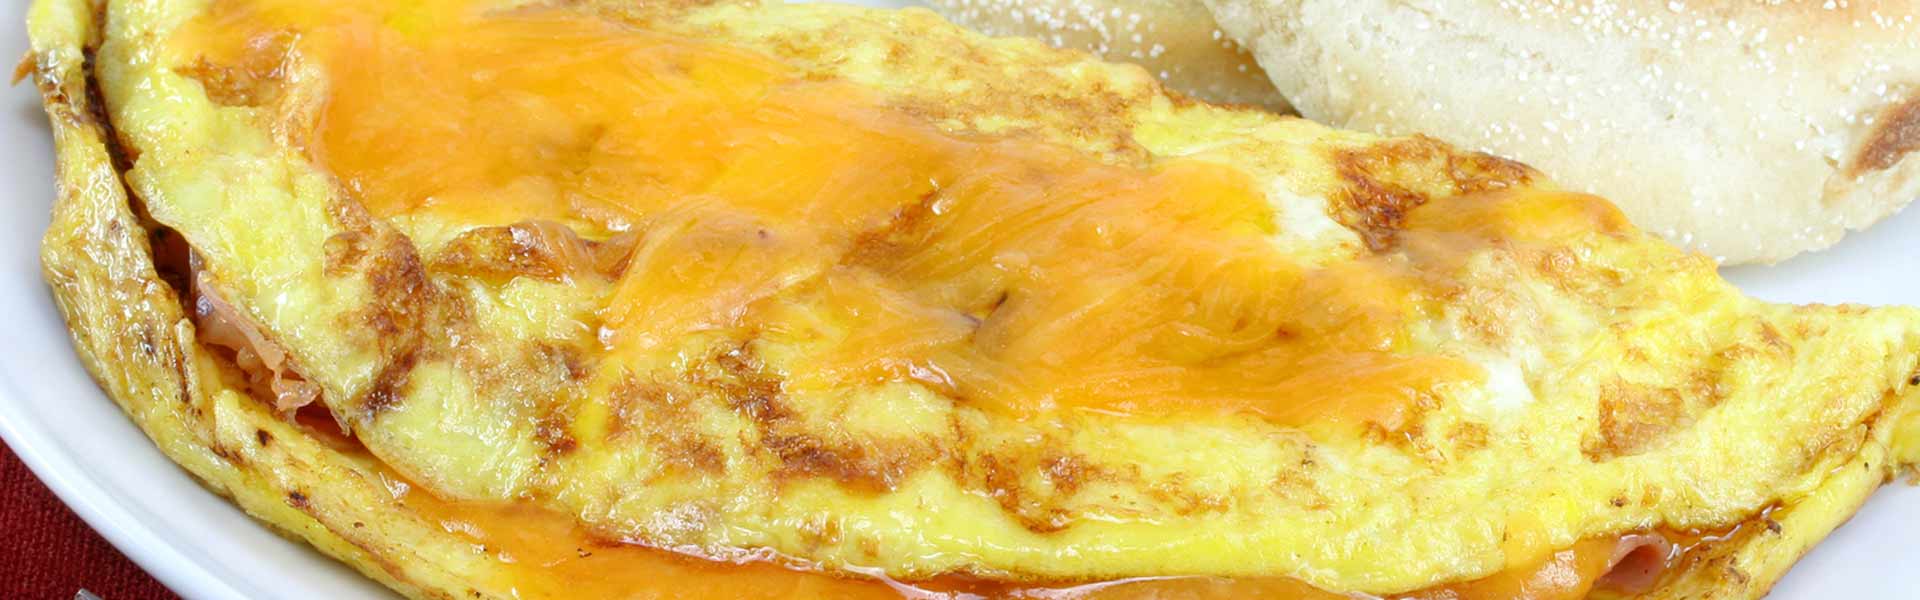 country-omelette-large